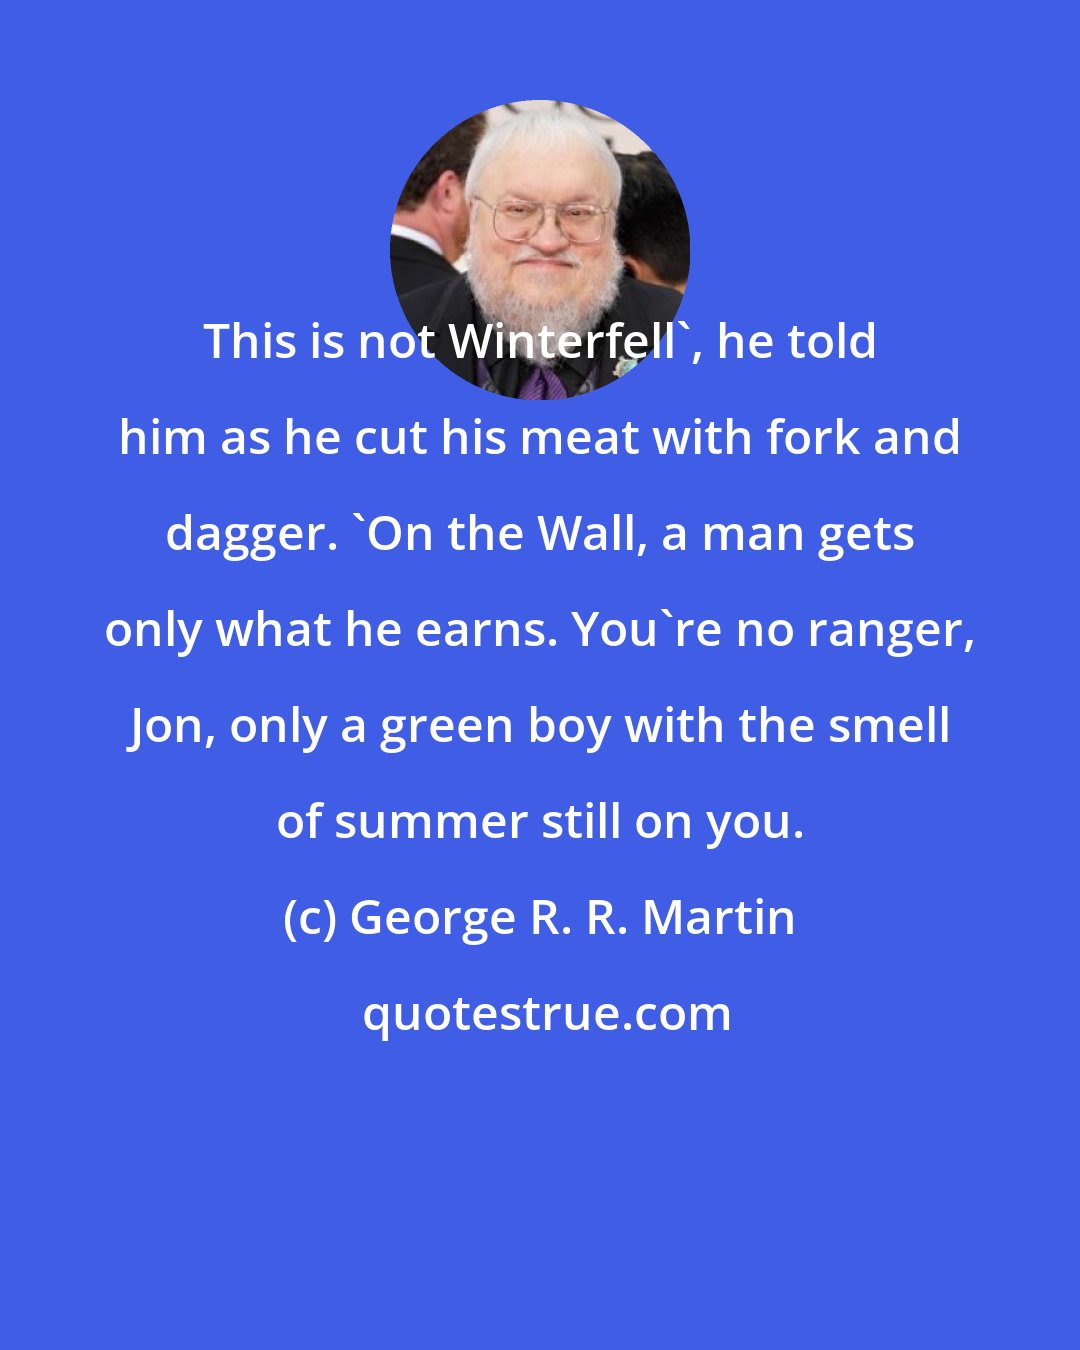 George R. R. Martin: This is not Winterfell', he told him as he cut his meat with fork and dagger. 'On the Wall, a man gets only what he earns. You're no ranger, Jon, only a green boy with the smell of summer still on you.